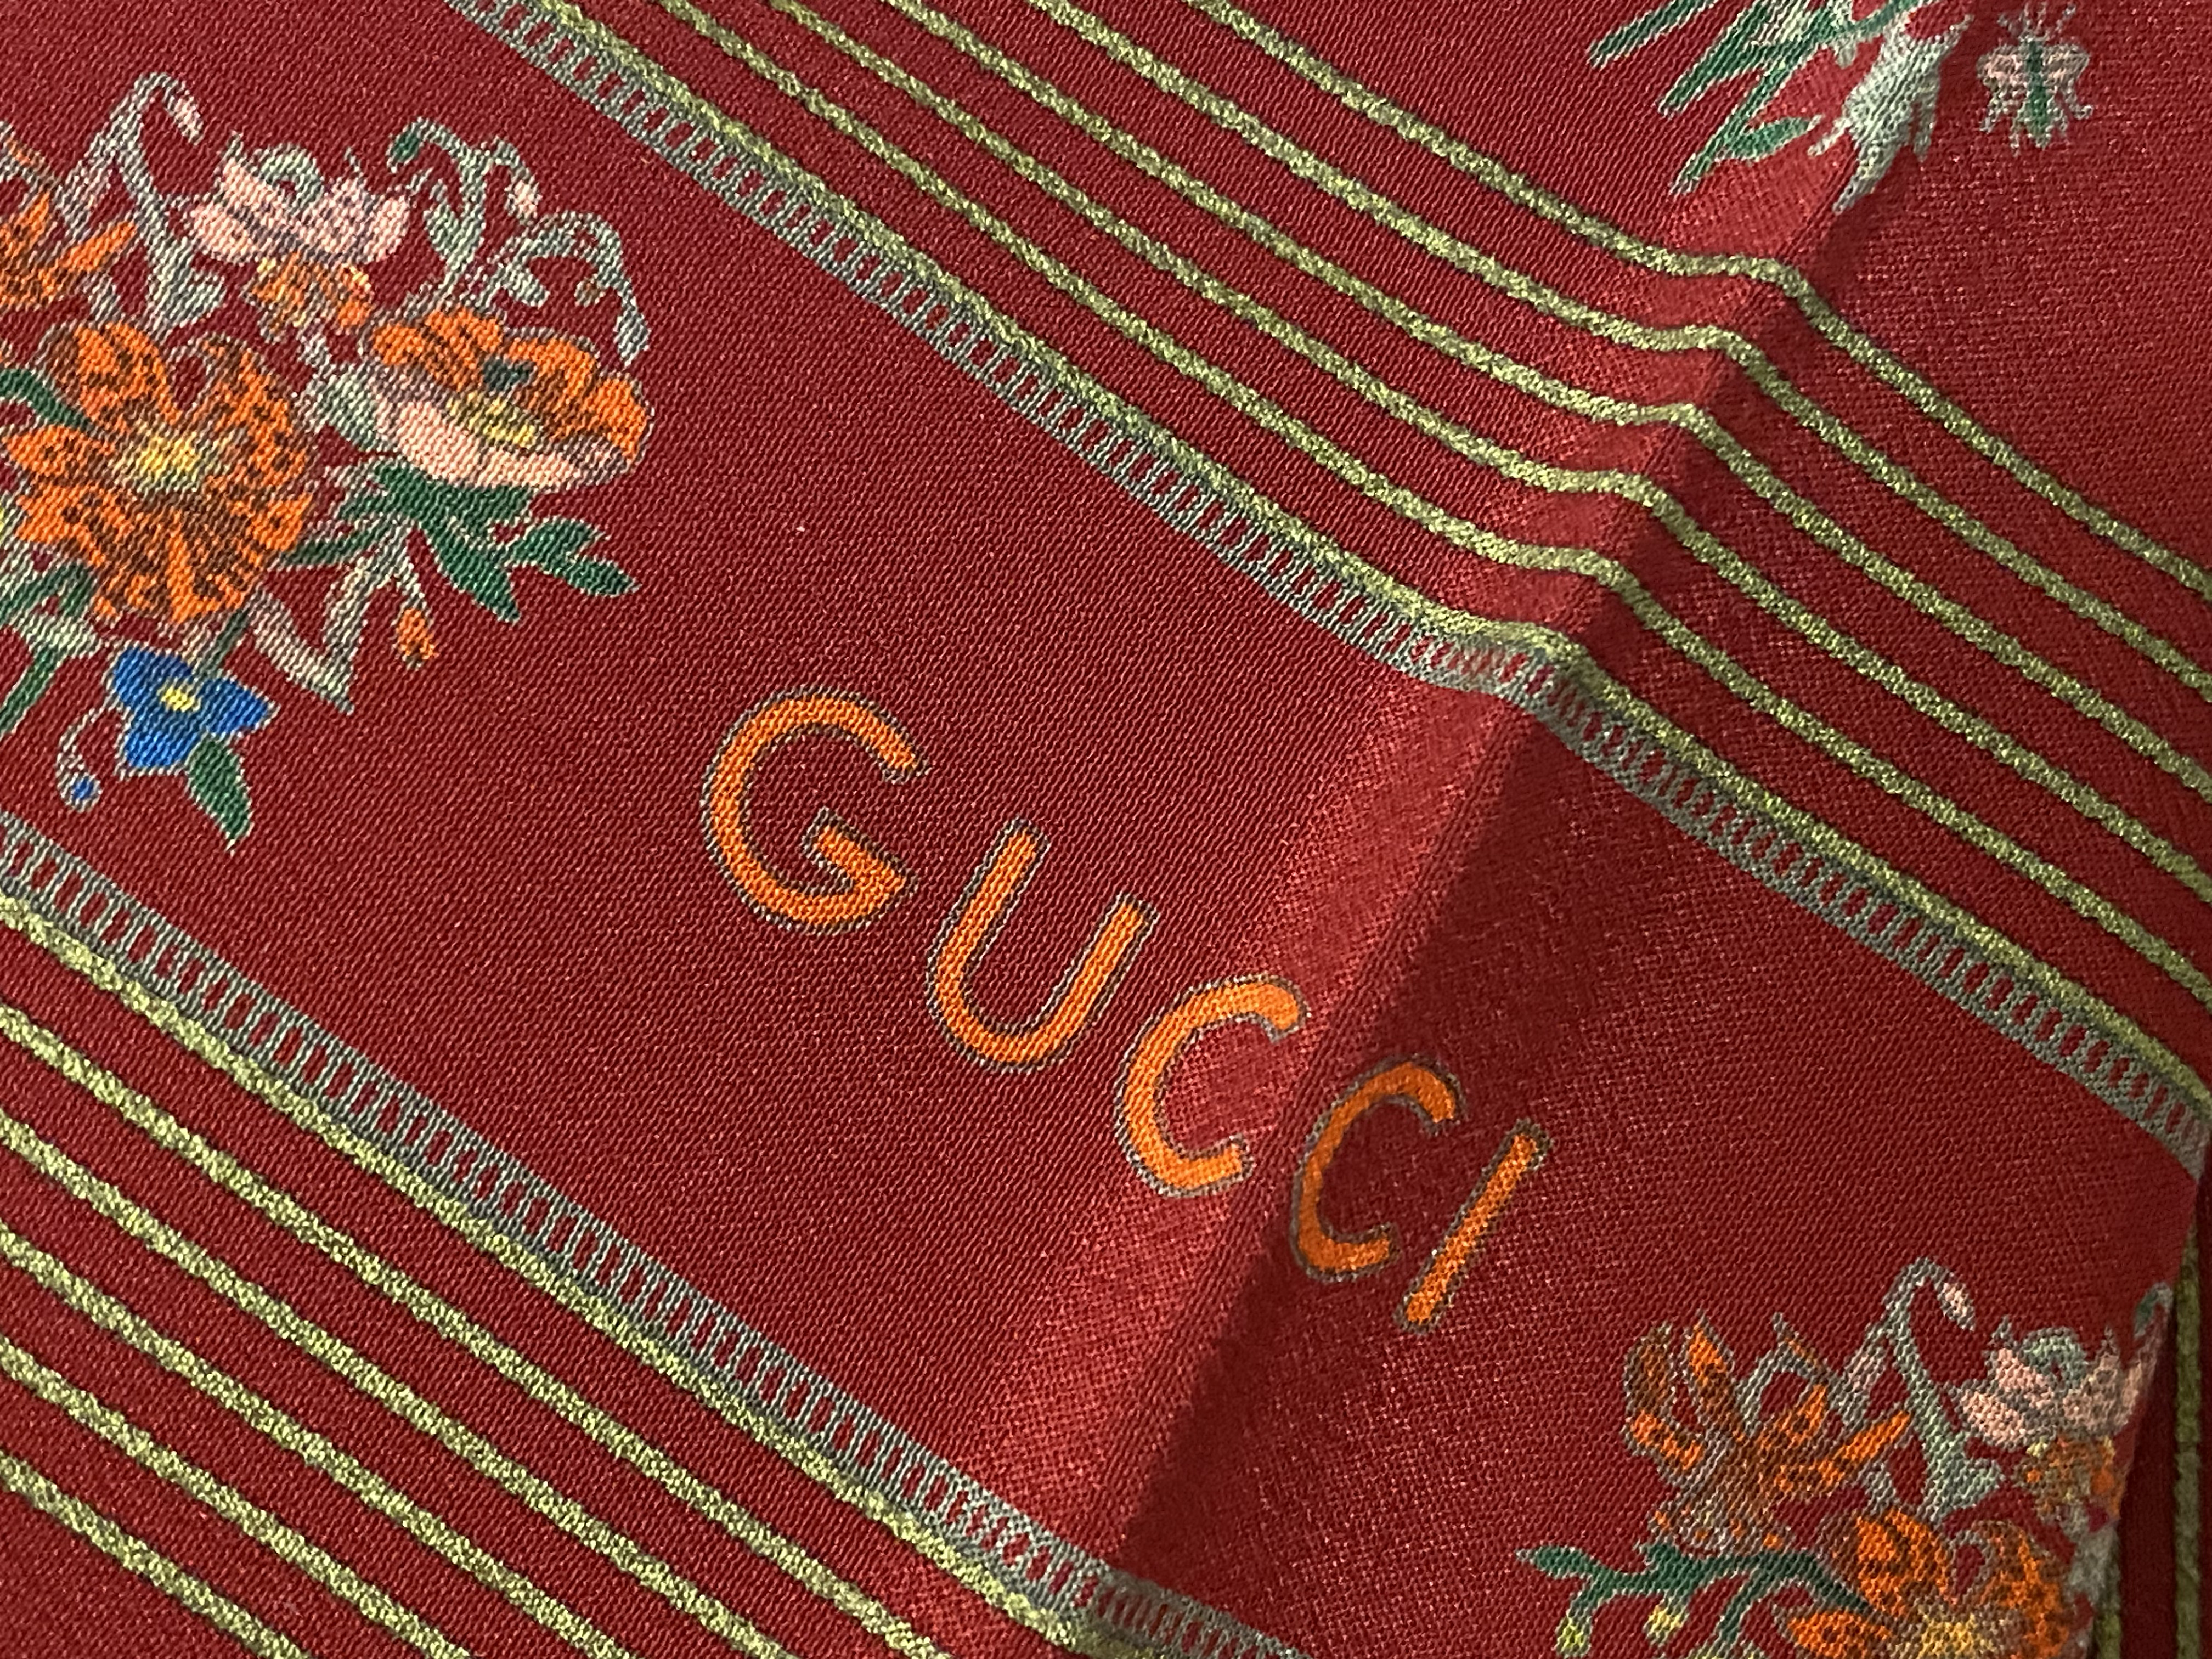 GUCCI SILK SCARF - FLORAL - Image 2 of 2